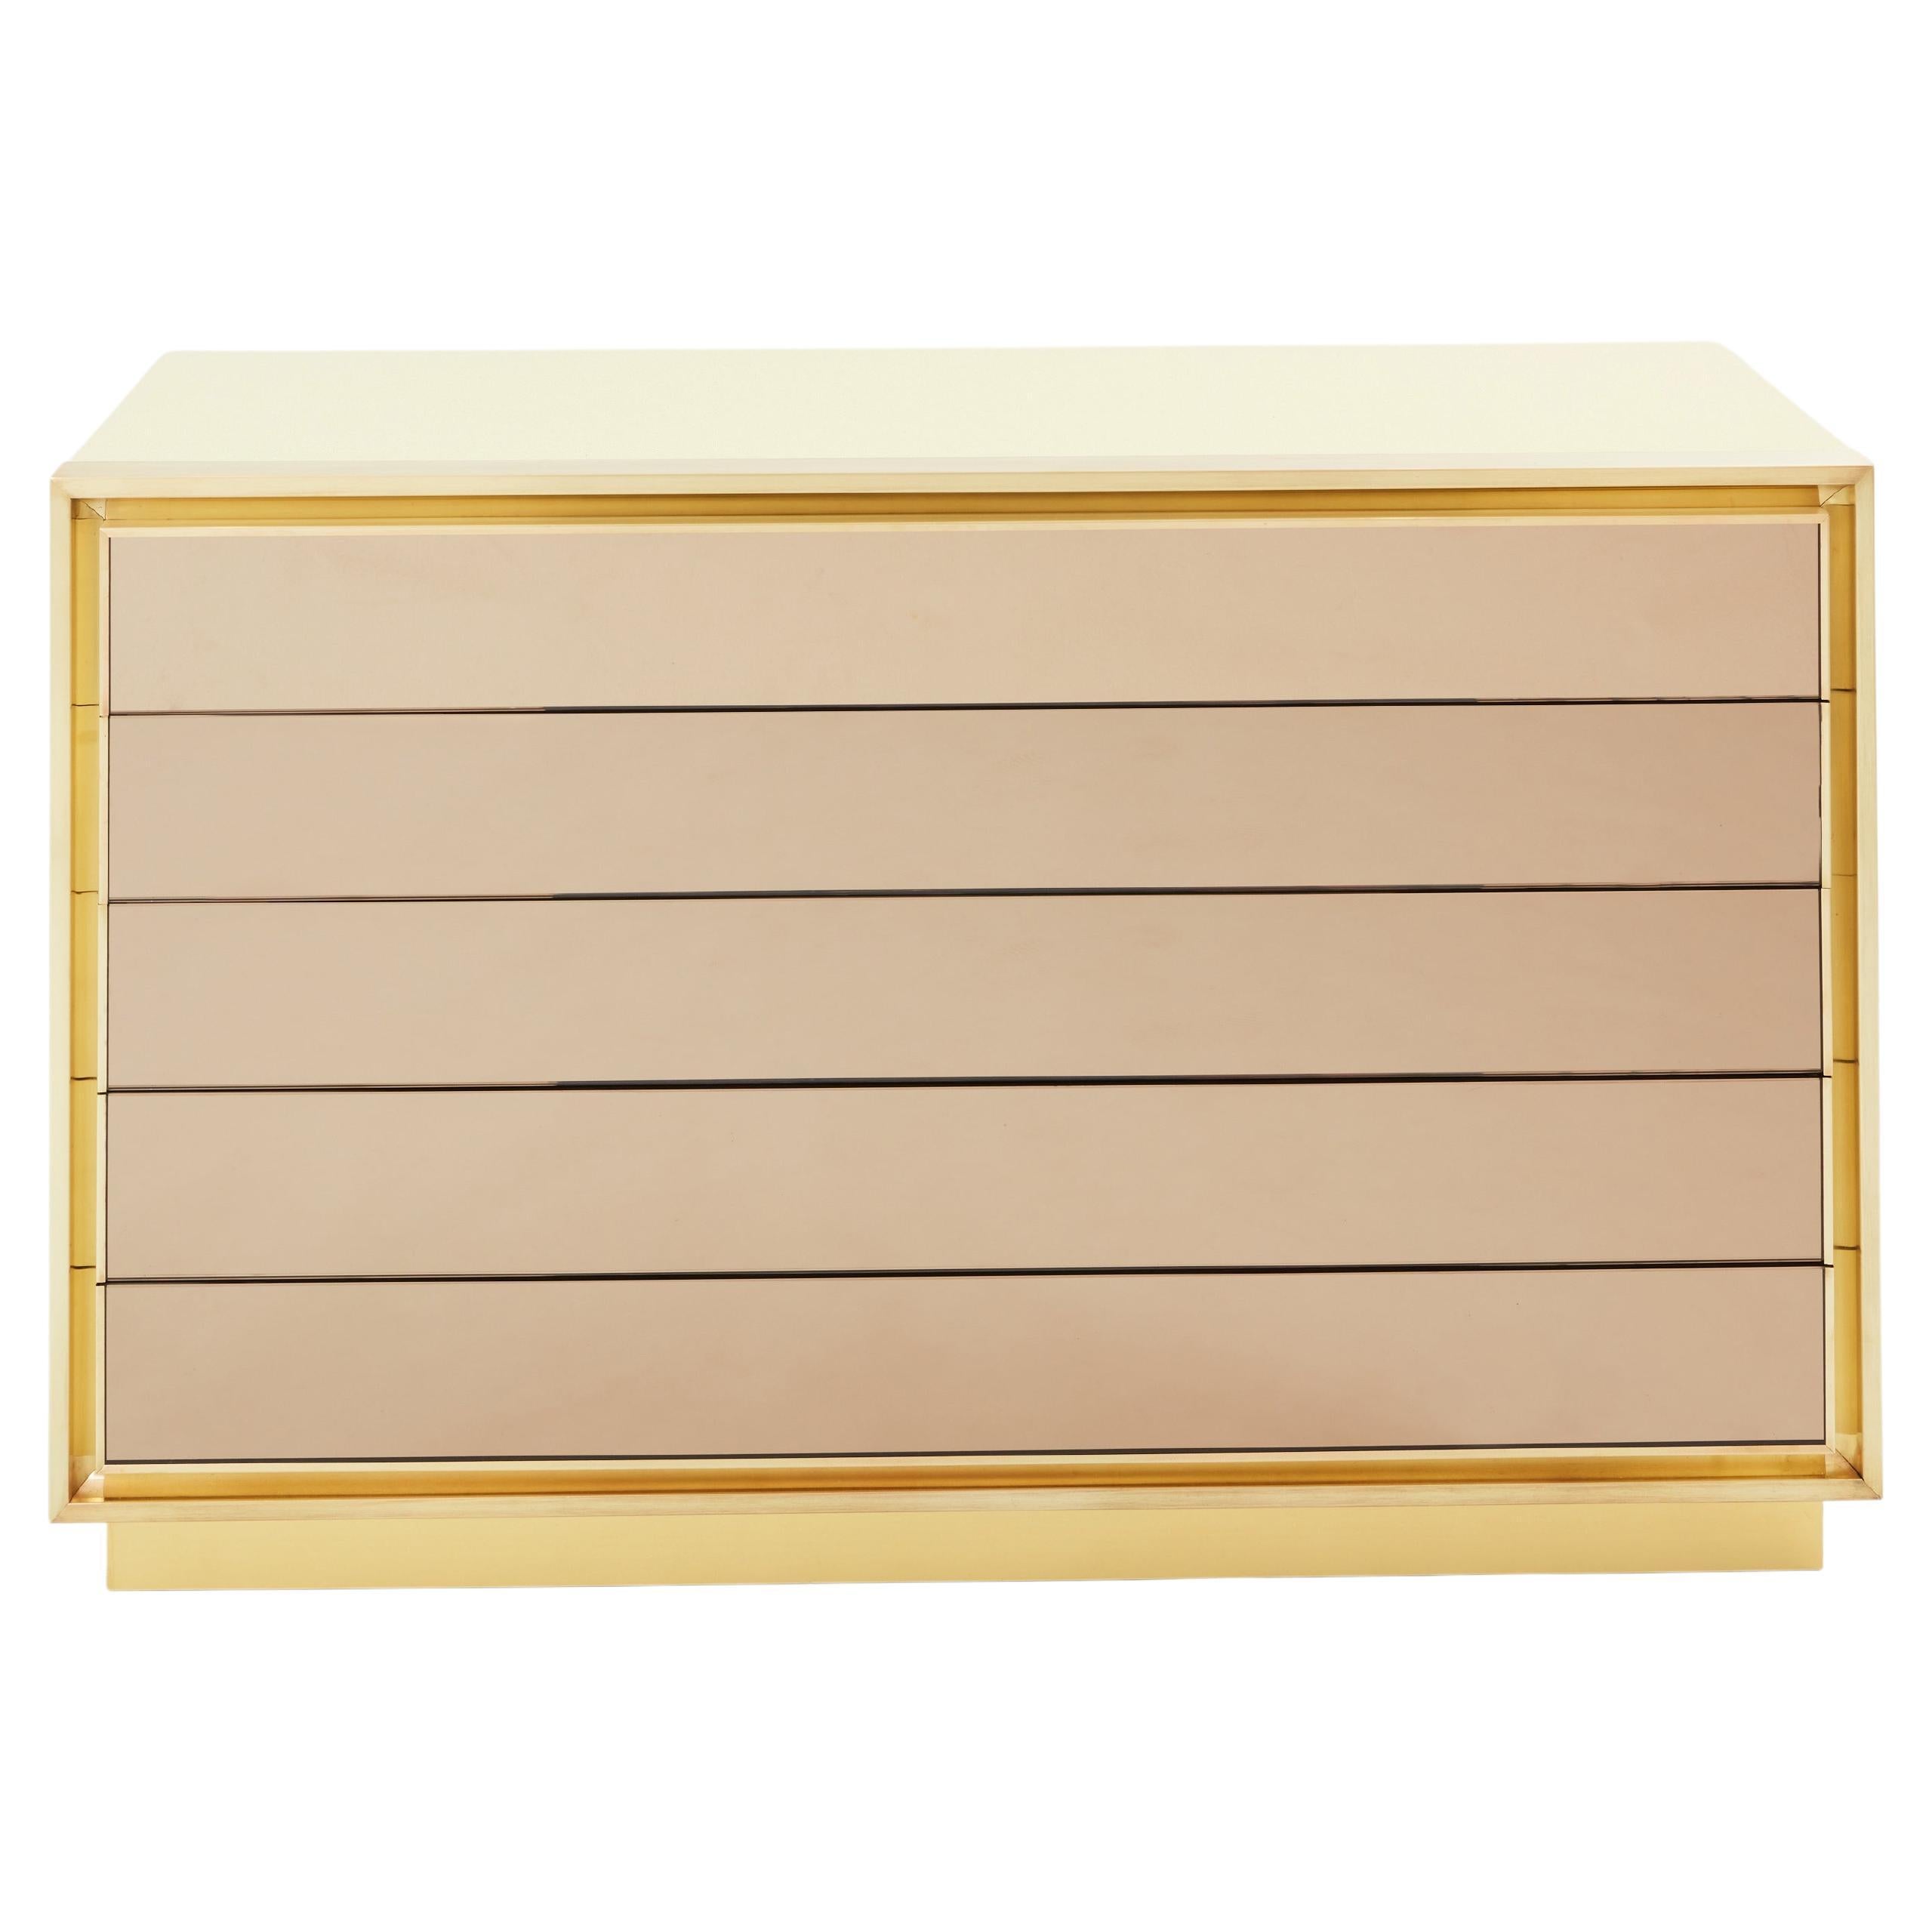 Maison Jansen cream lacquer brass mirrored chest of drawers 1970s For Sale